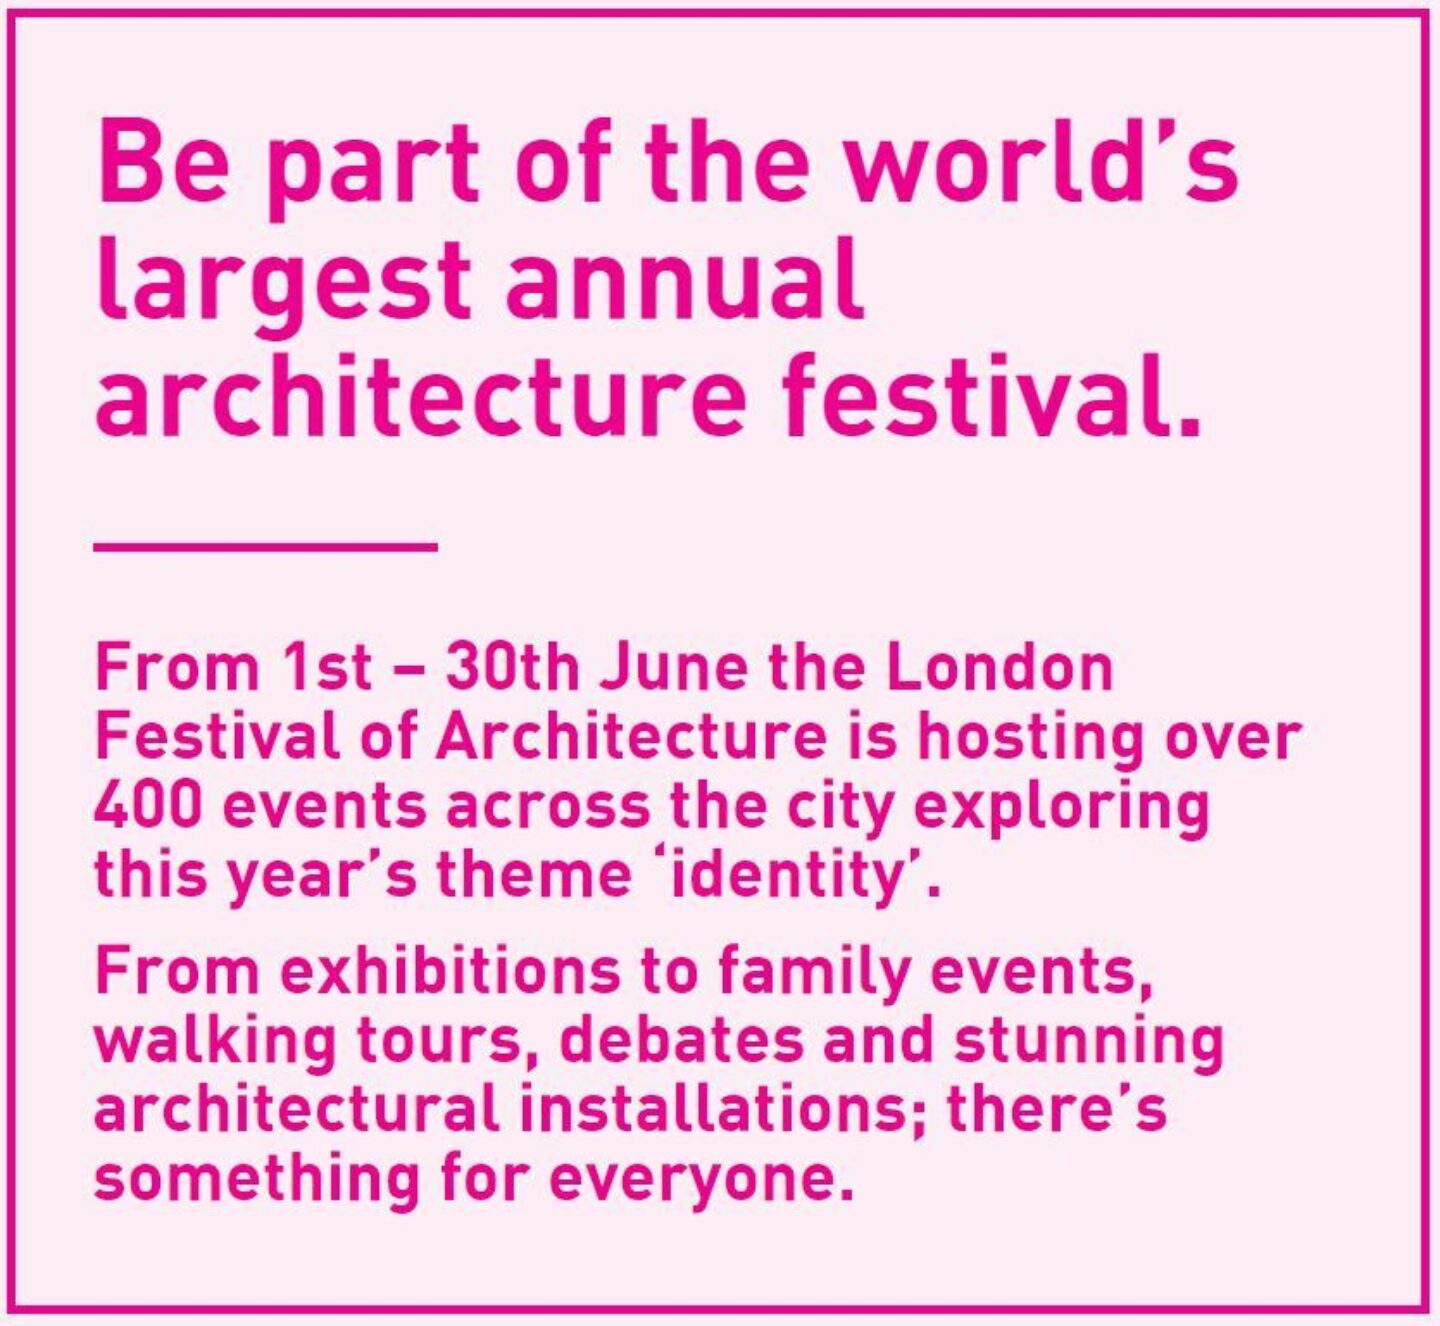 Elliott Wood - Patrons of the London Festival of Architecture